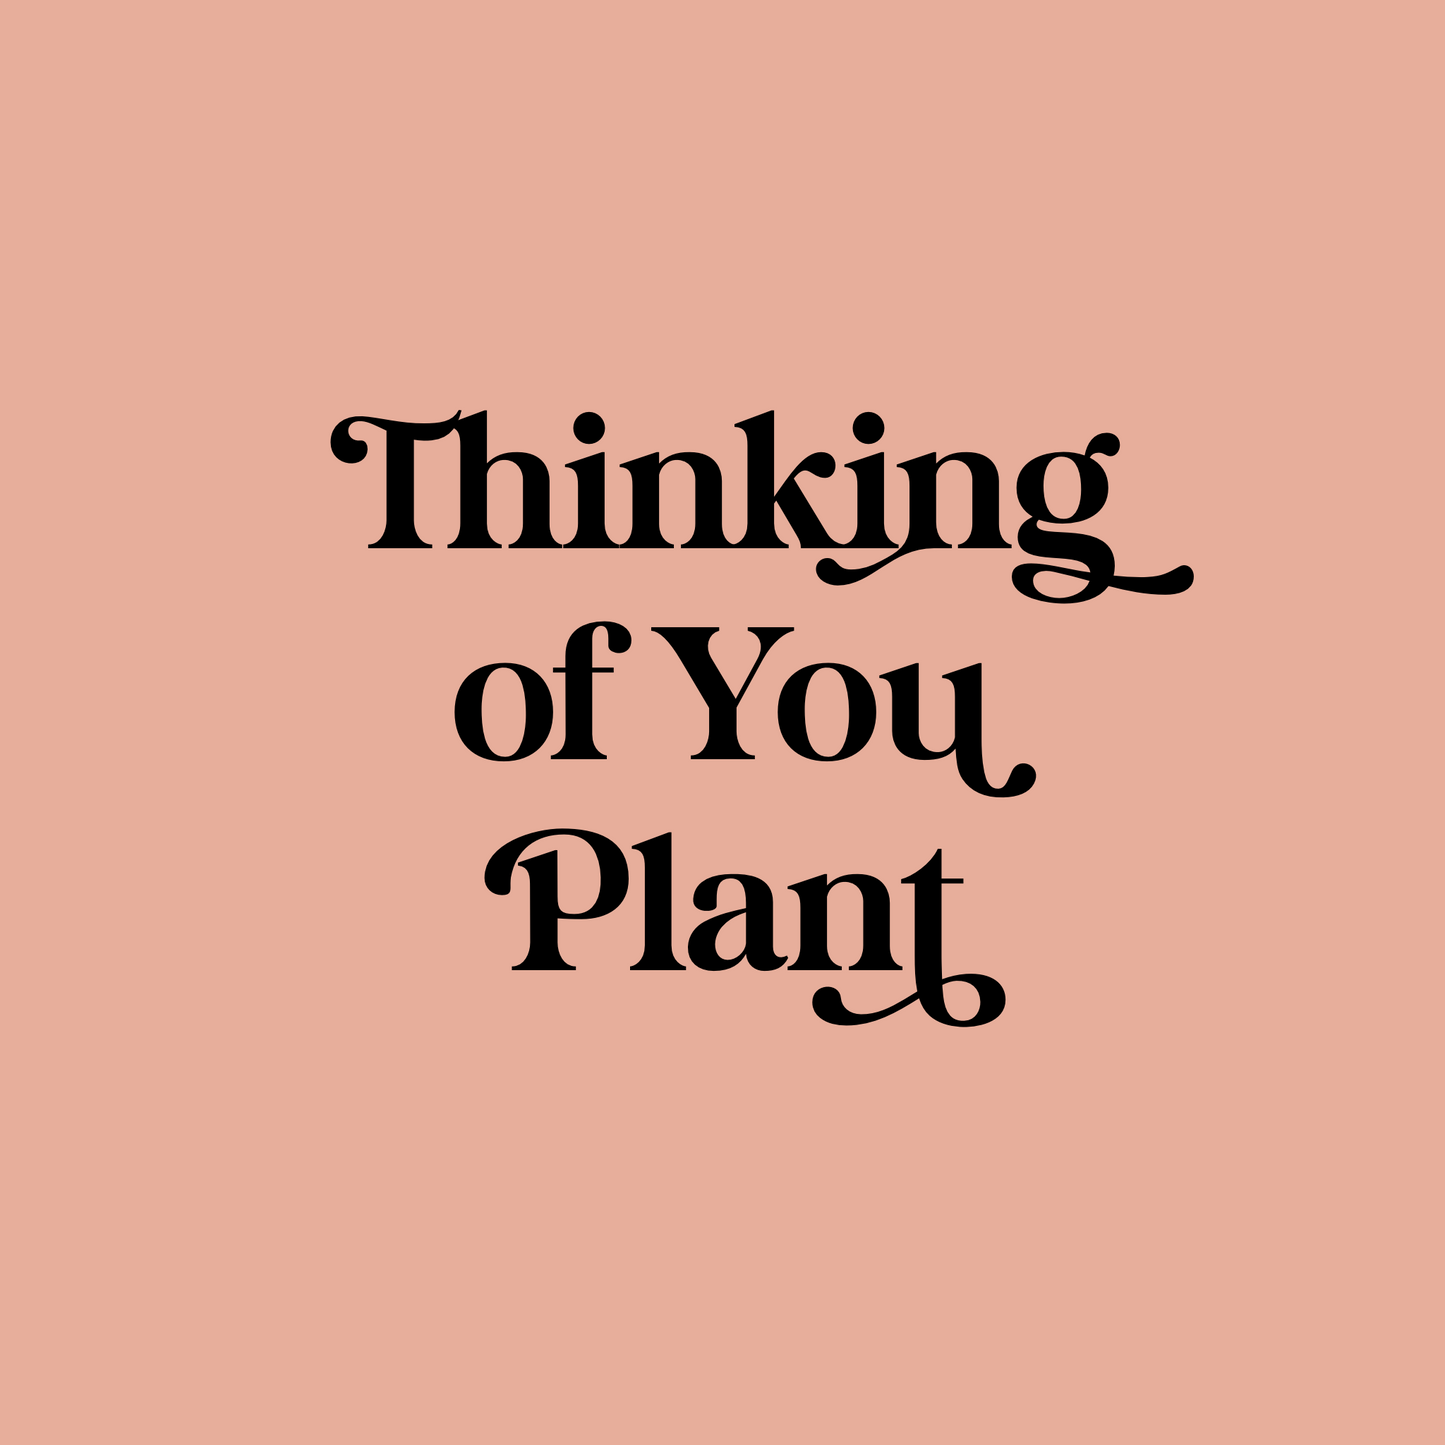 Thinking of You Plant